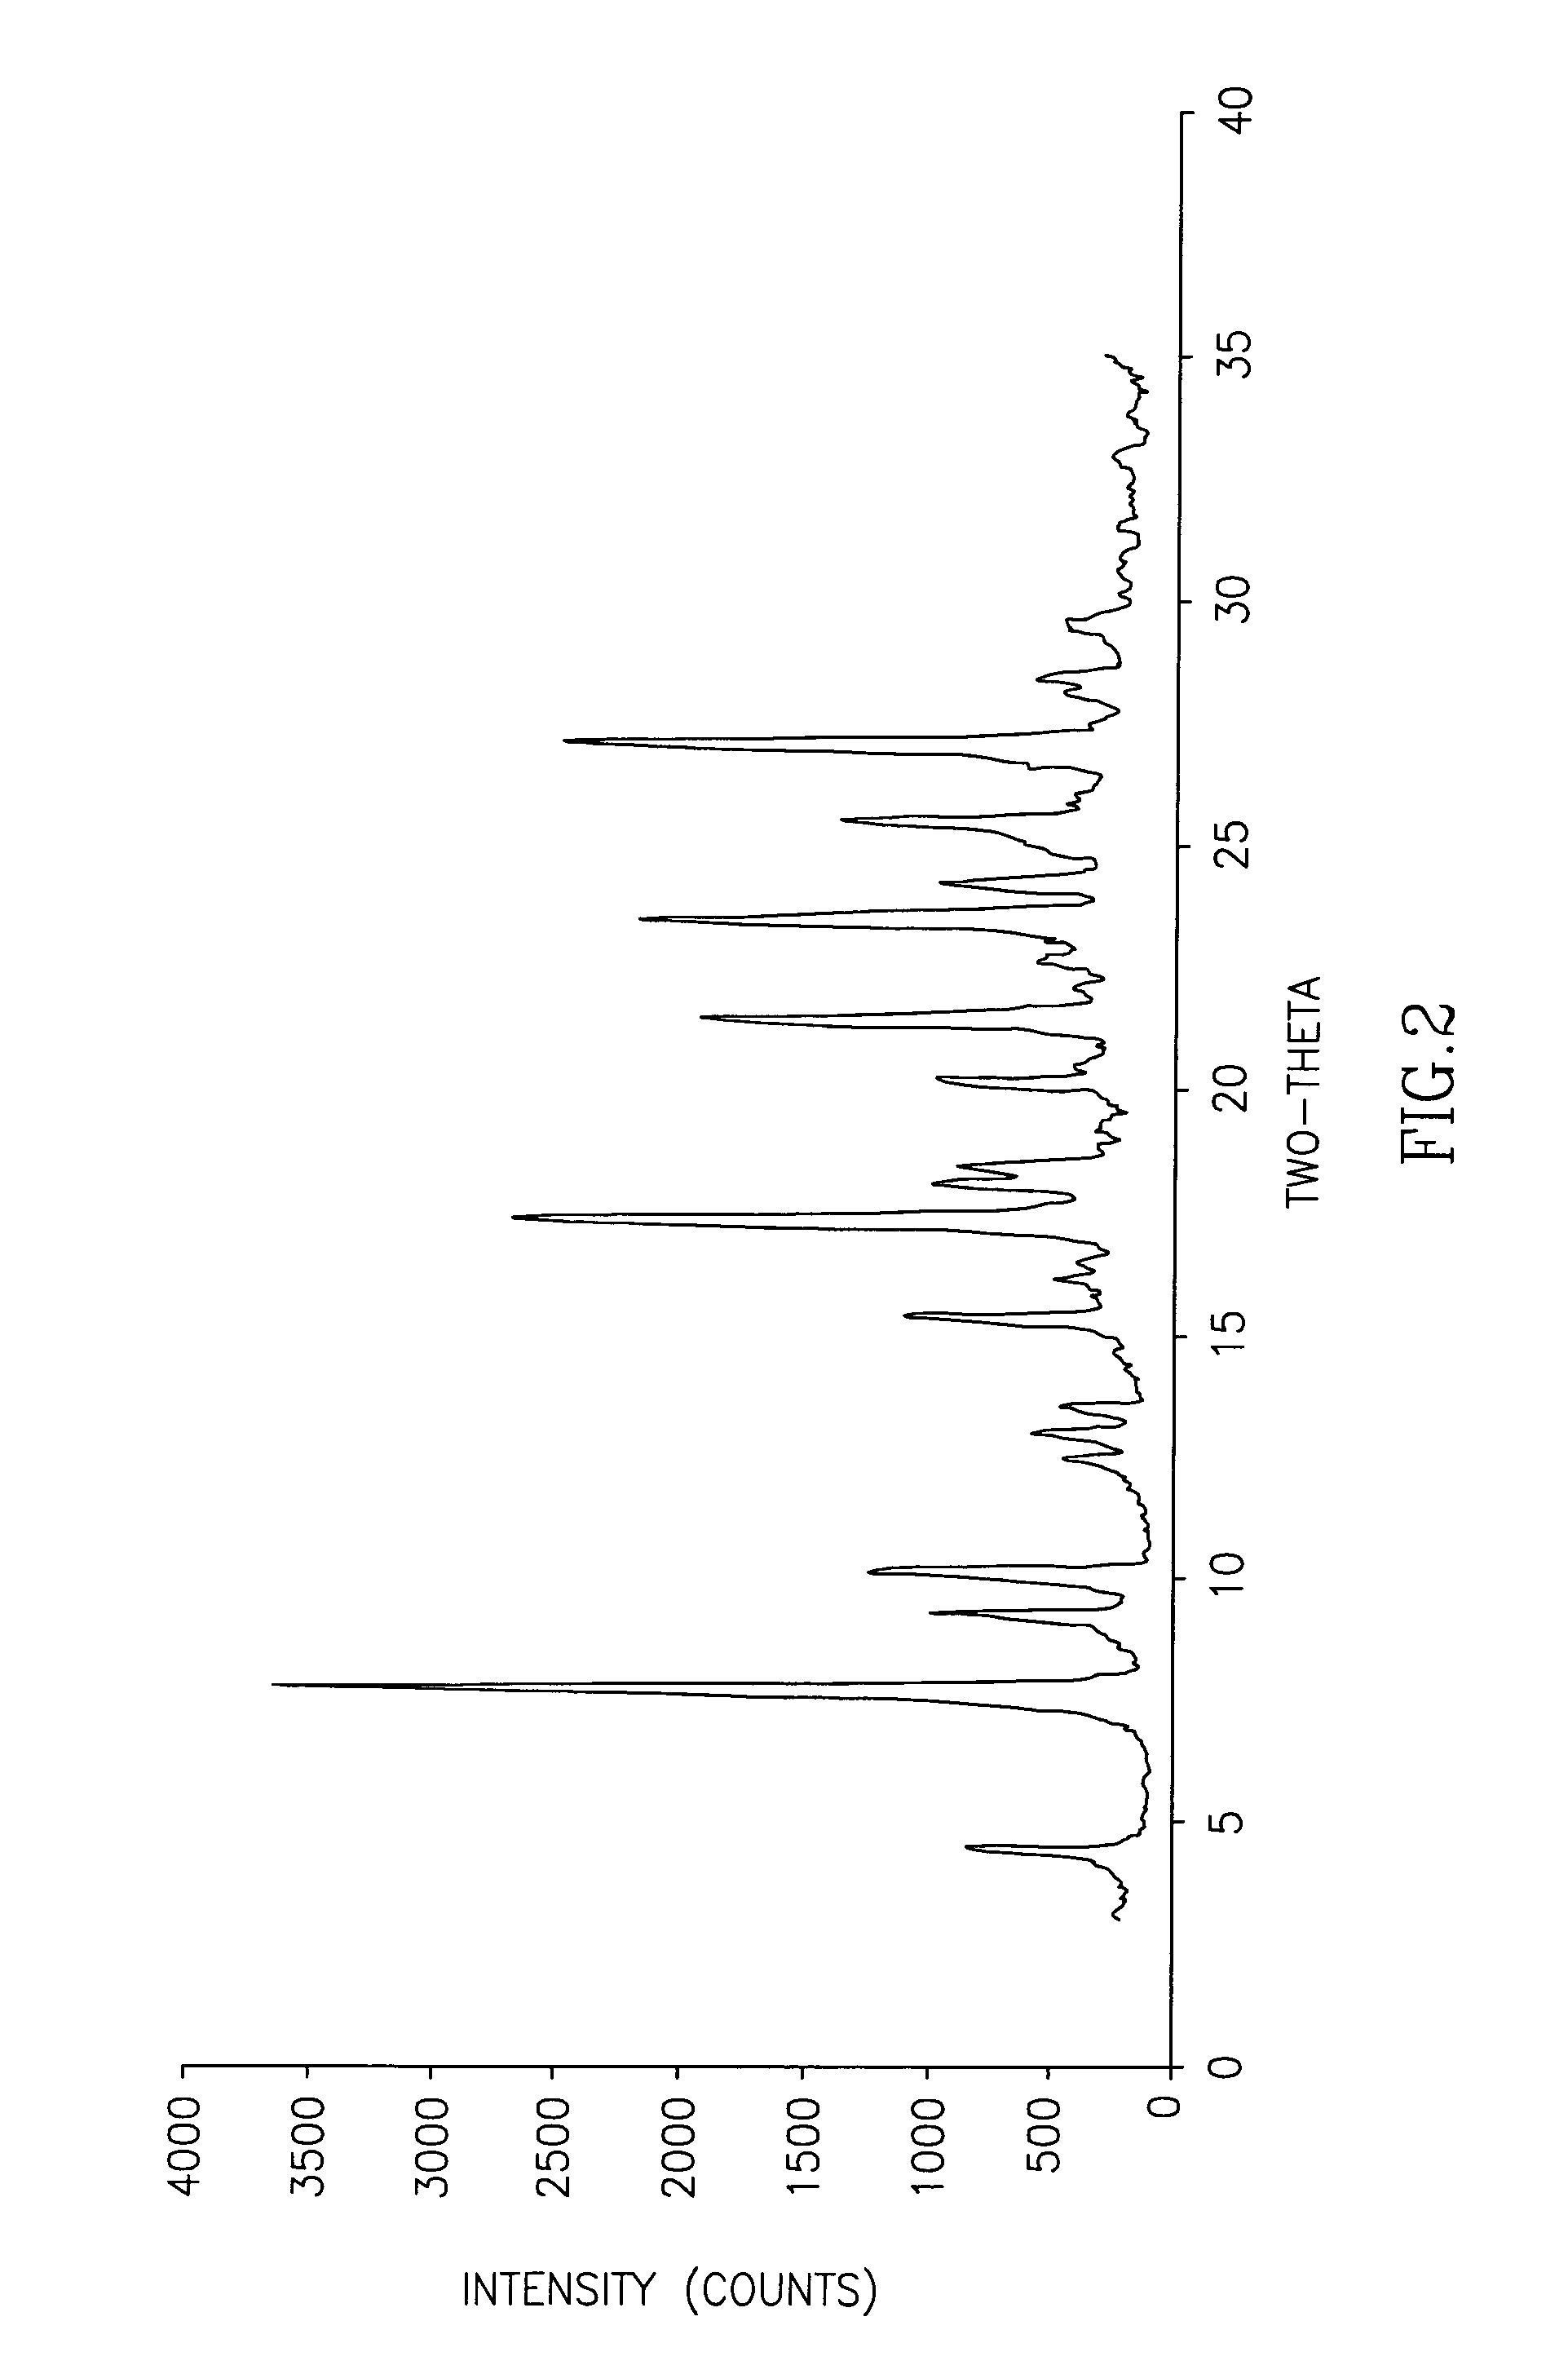 Process for producing cisatracurium compounds and associated intermediates